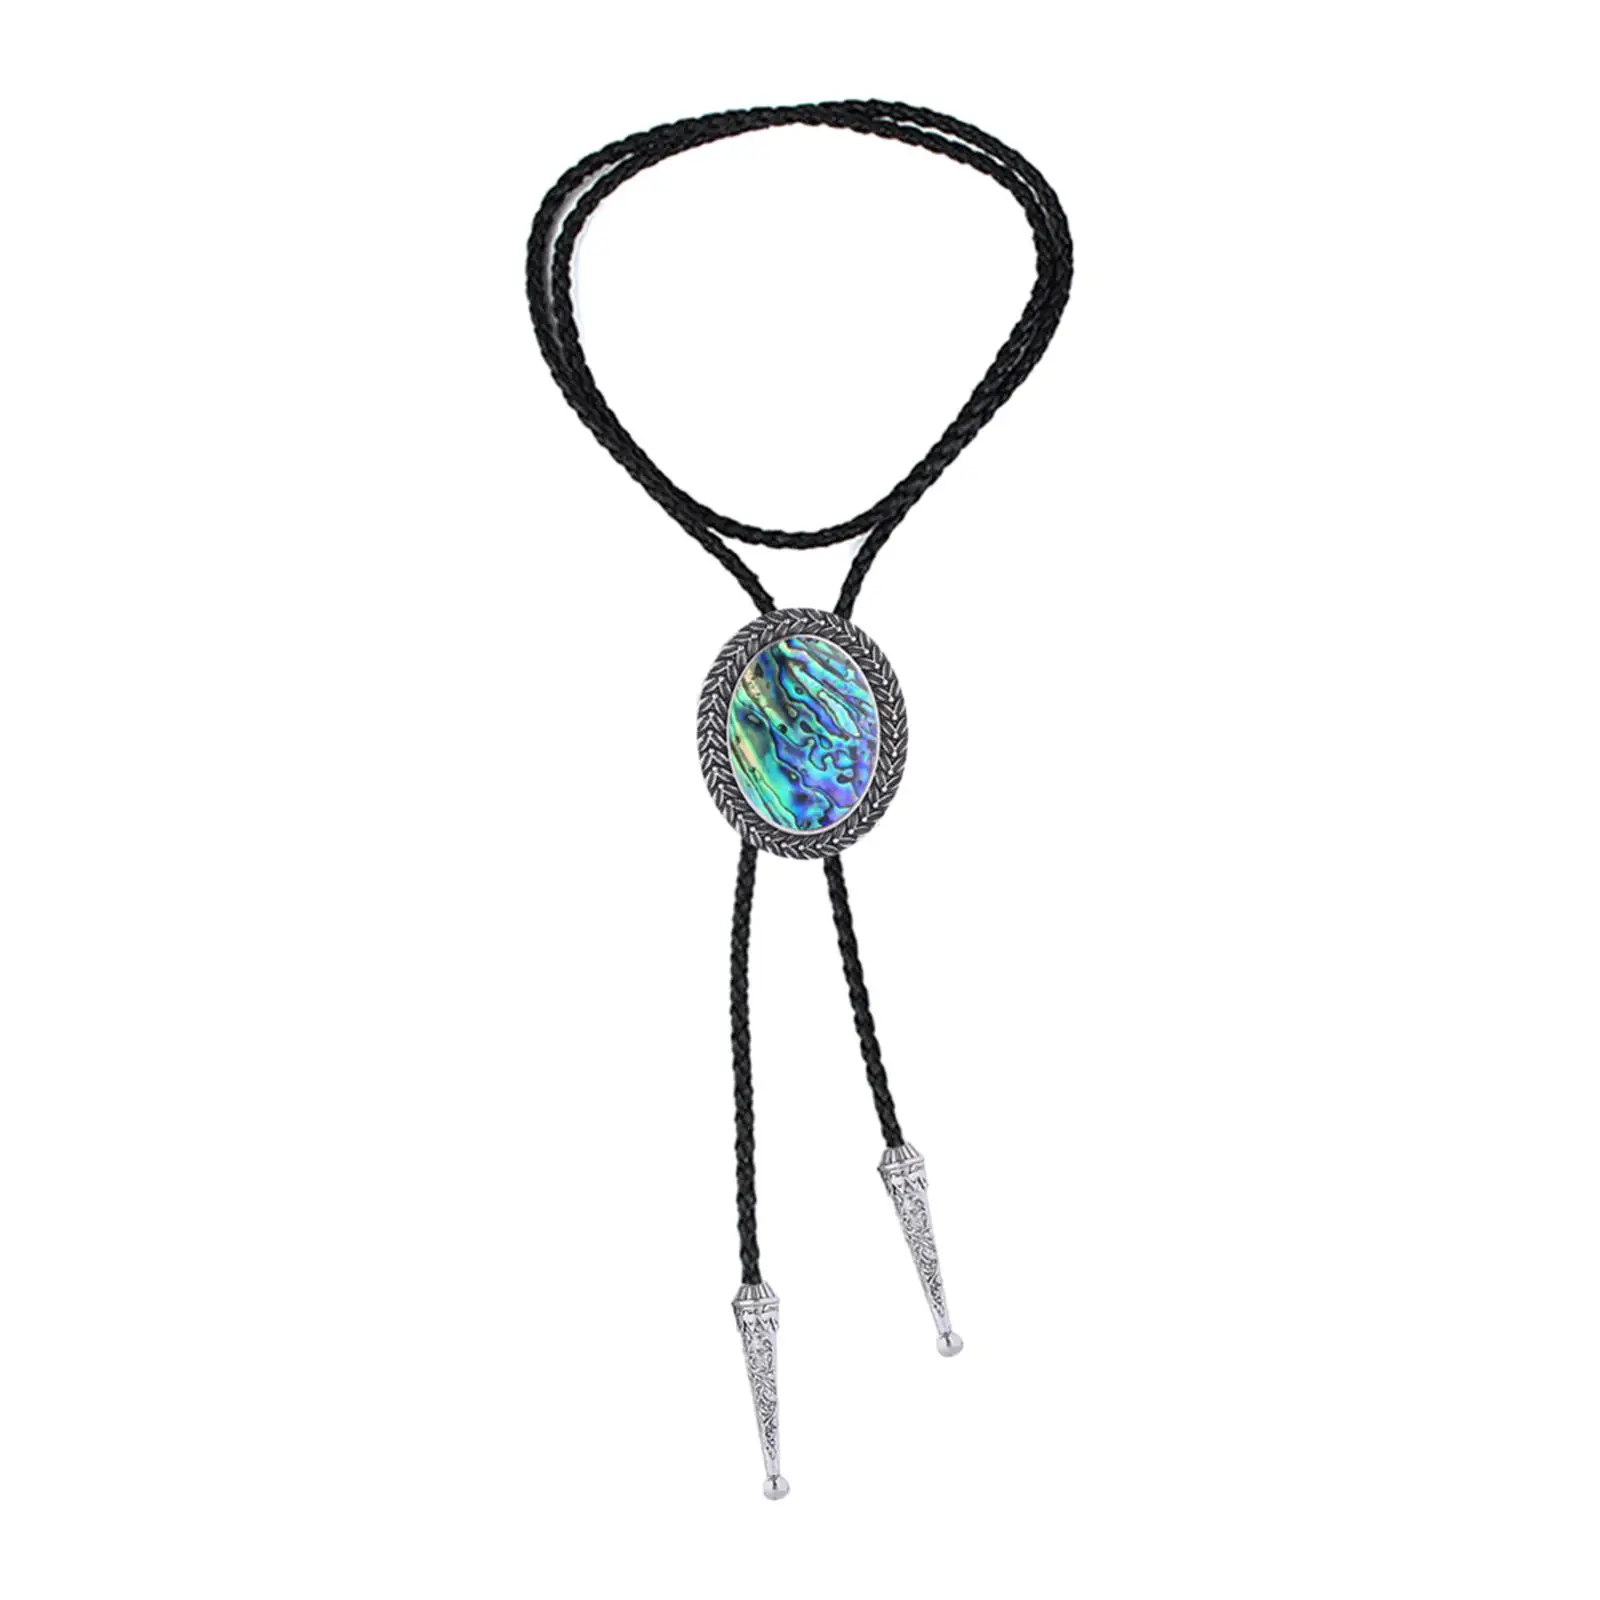 Western Bolo Tie Costume Accessories Handmade PU Leather Unique Pendant Cowboy Necktie for Family Woman Christmas Birthday Photo